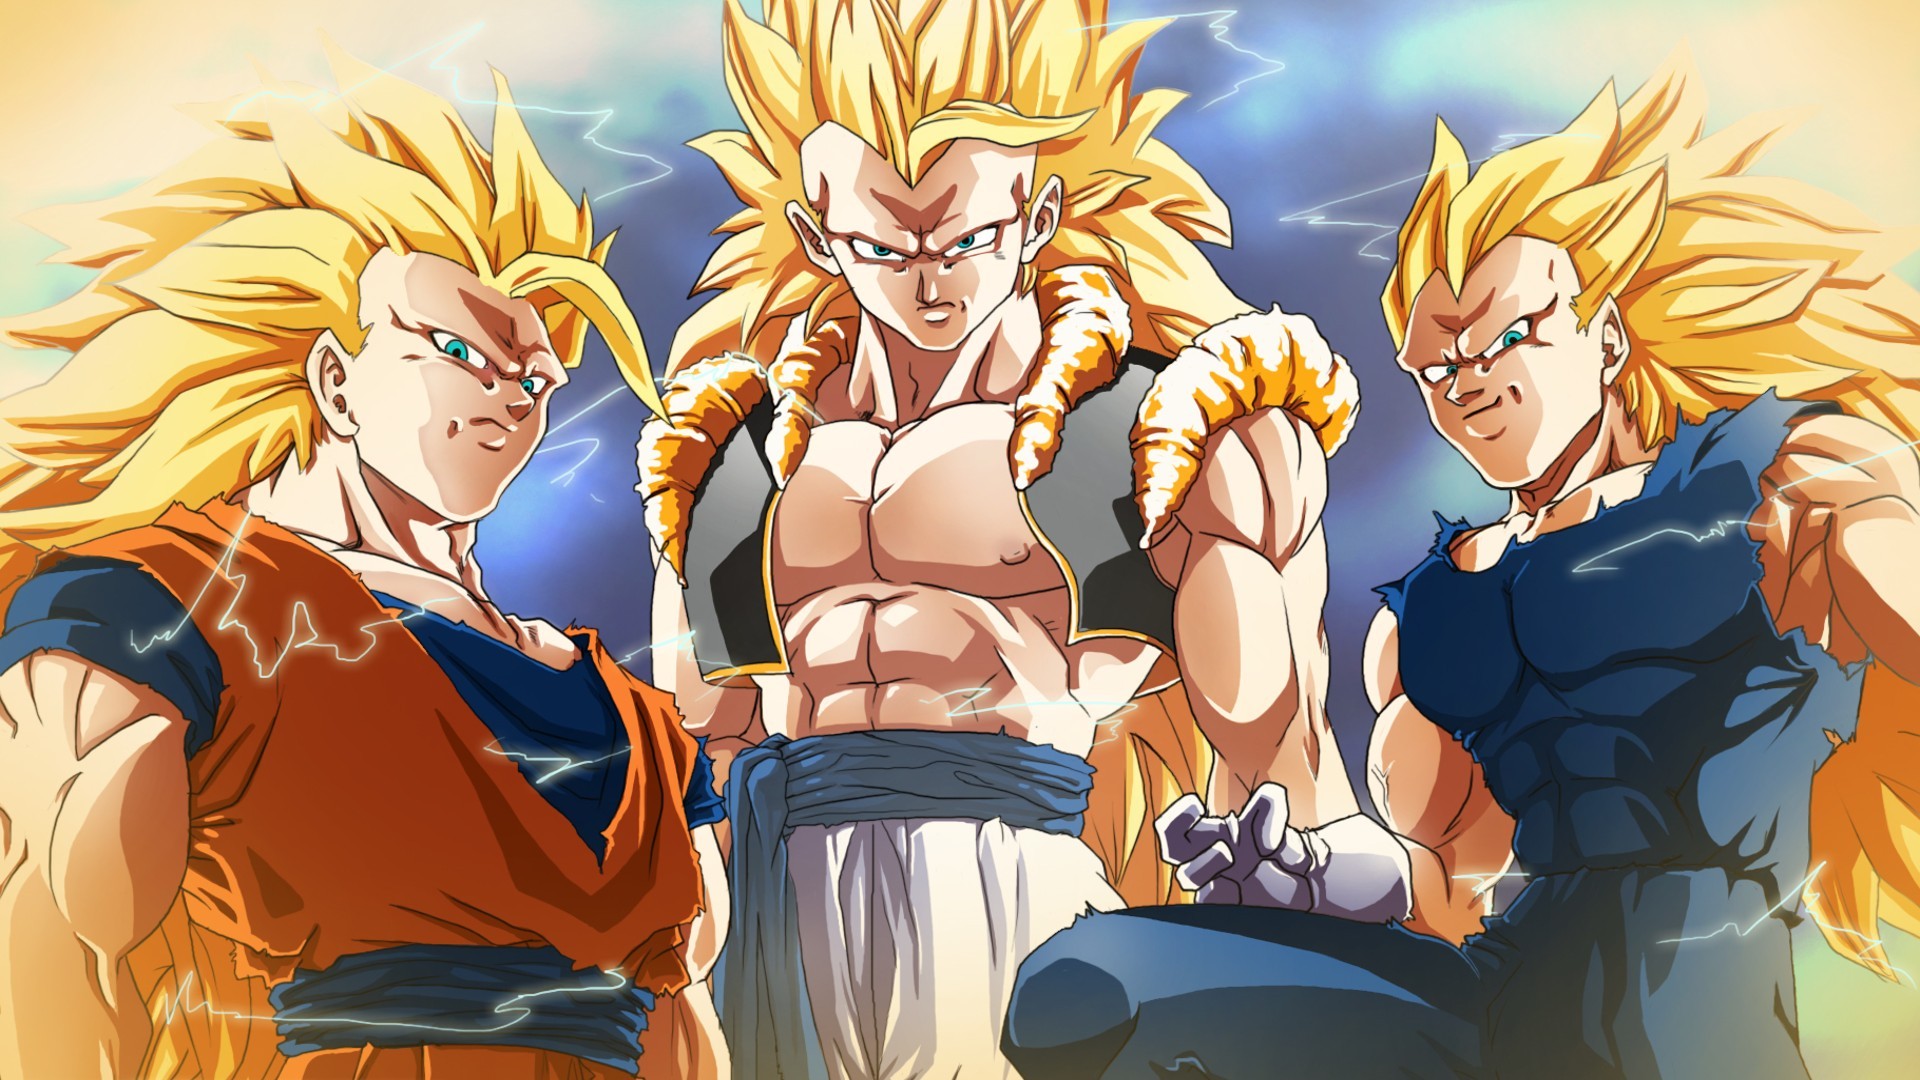 Wallpaper Goku SSJ3 with image resolution 1920x1080 pixel. You can use this wallpaper as background for your desktop Computer Screensavers, Android or iPhone smartphones